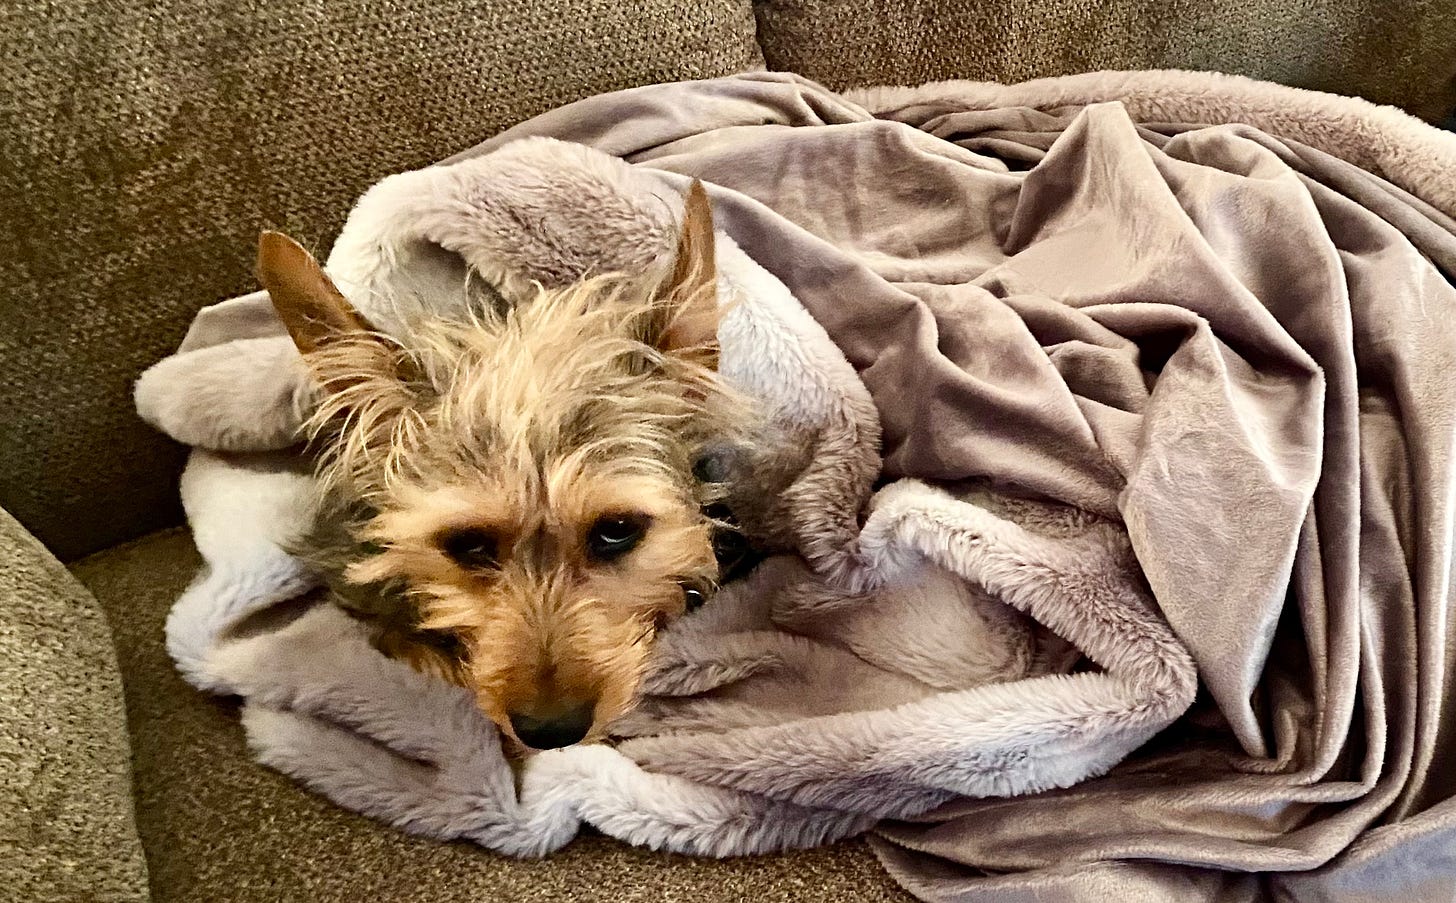 A tan and black terrier fully encased in a gray blanket